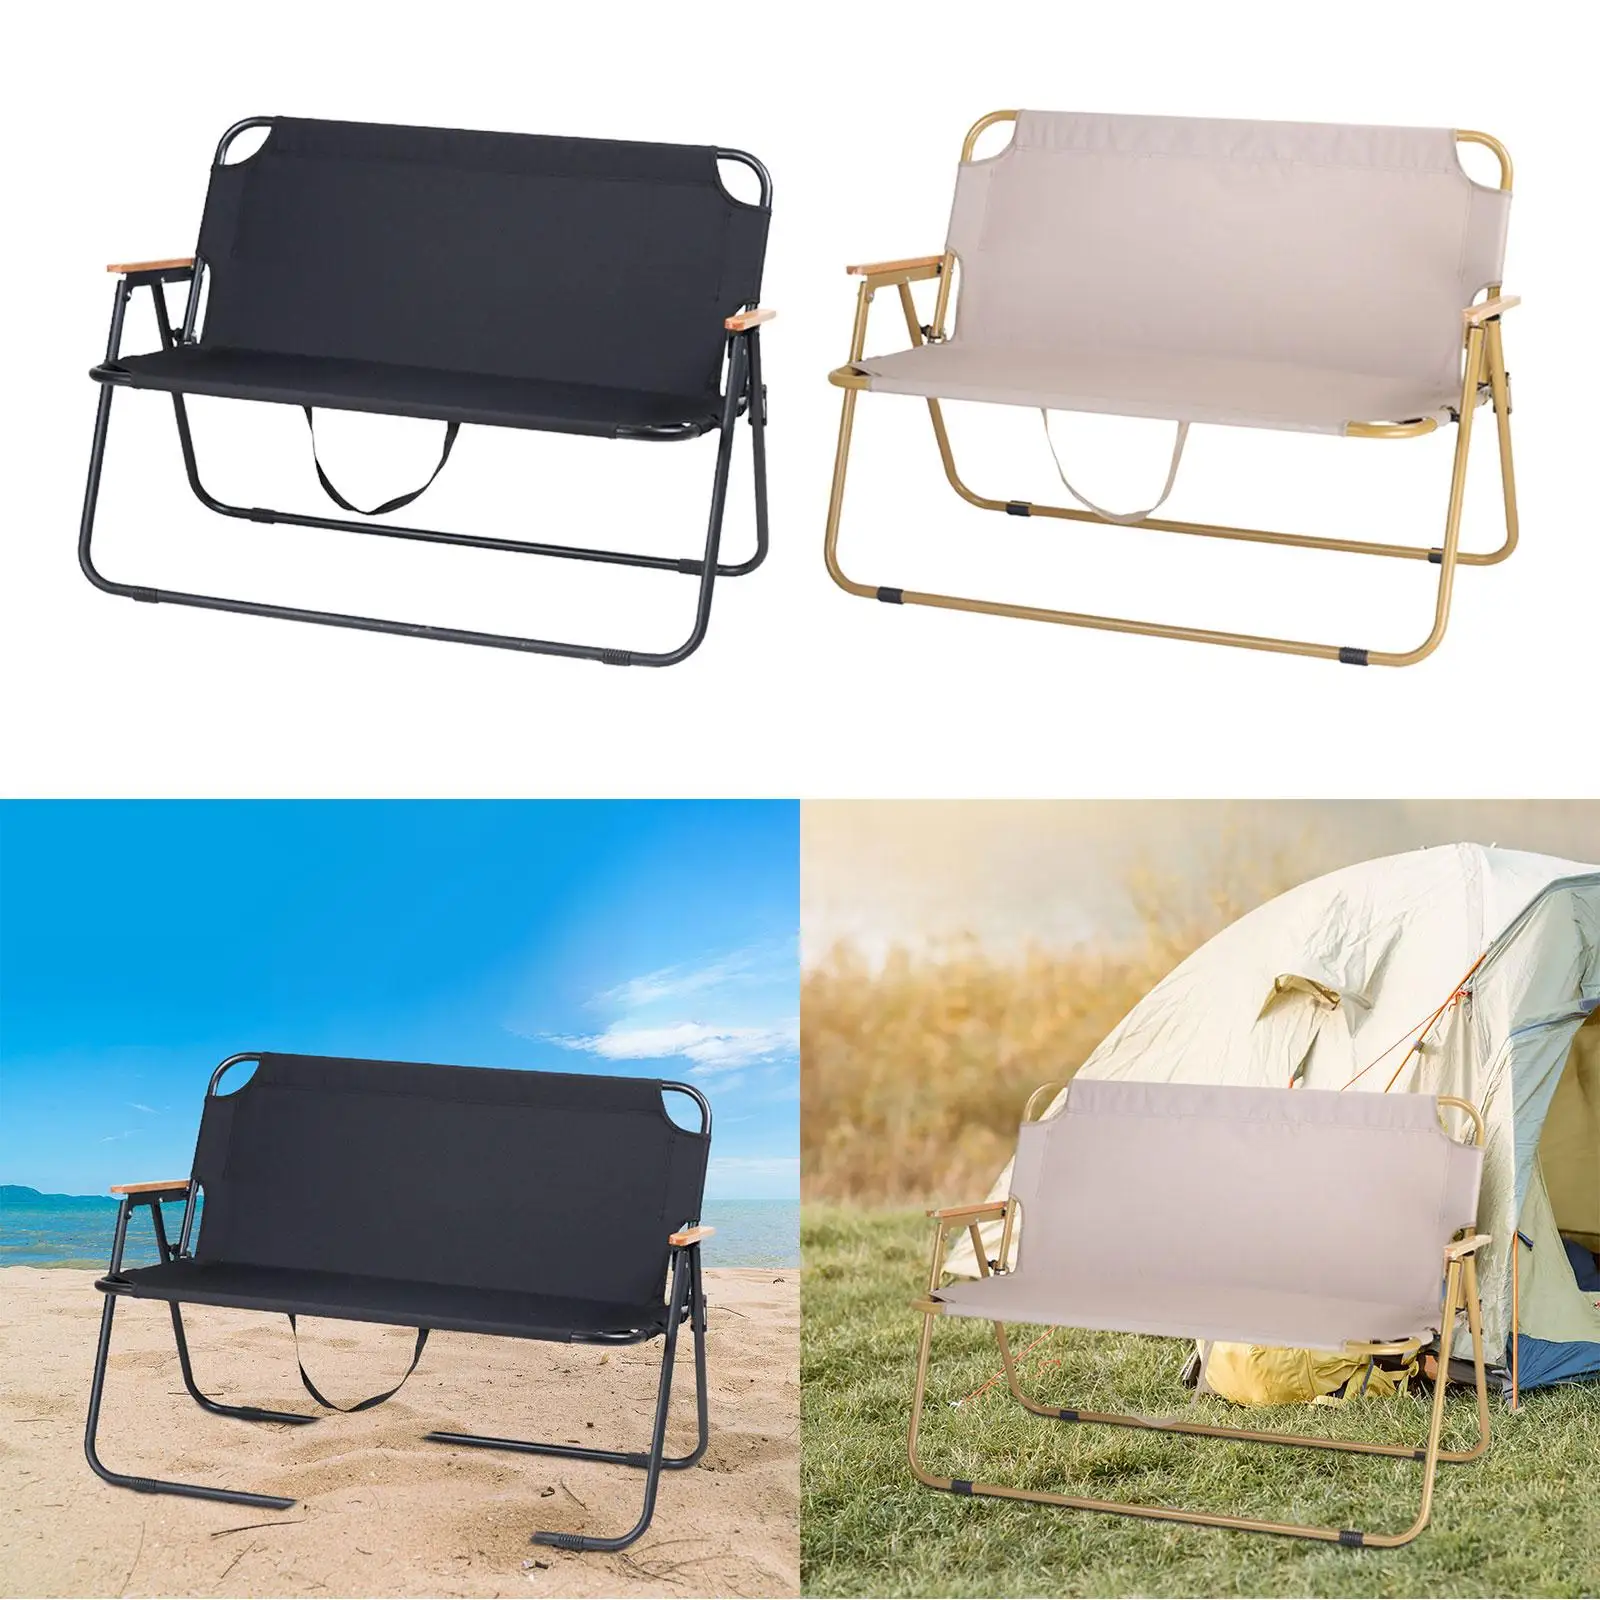 Folding Camping Chair Outside Travel Lightweight Patio Fishing Outdoor Camping Seat Double Chair Camp Chair Armchair Beach Chair